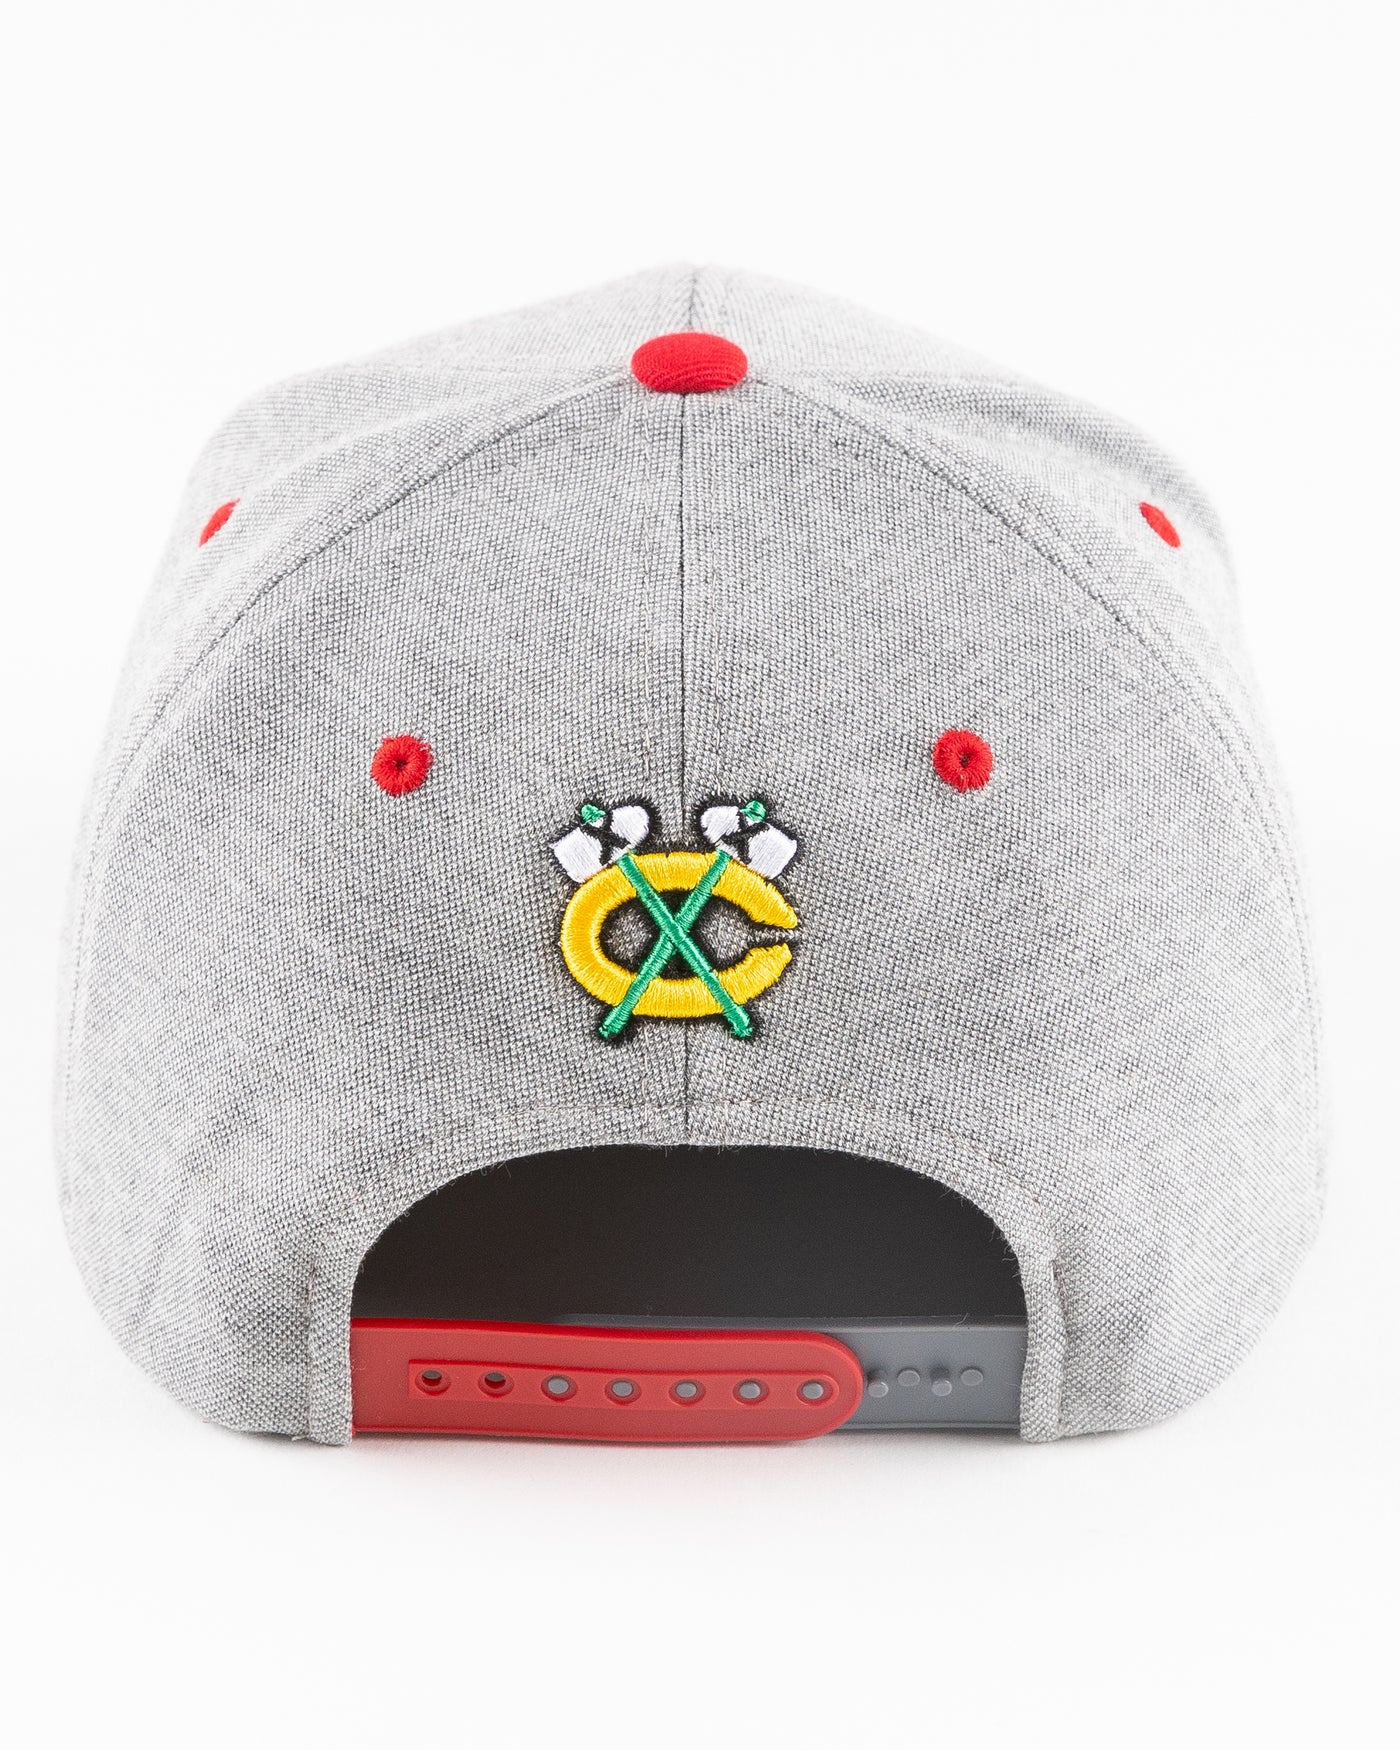 grey Rockford IceHogs snapback with red brim and embroidered IceHogs patch - back lay flat